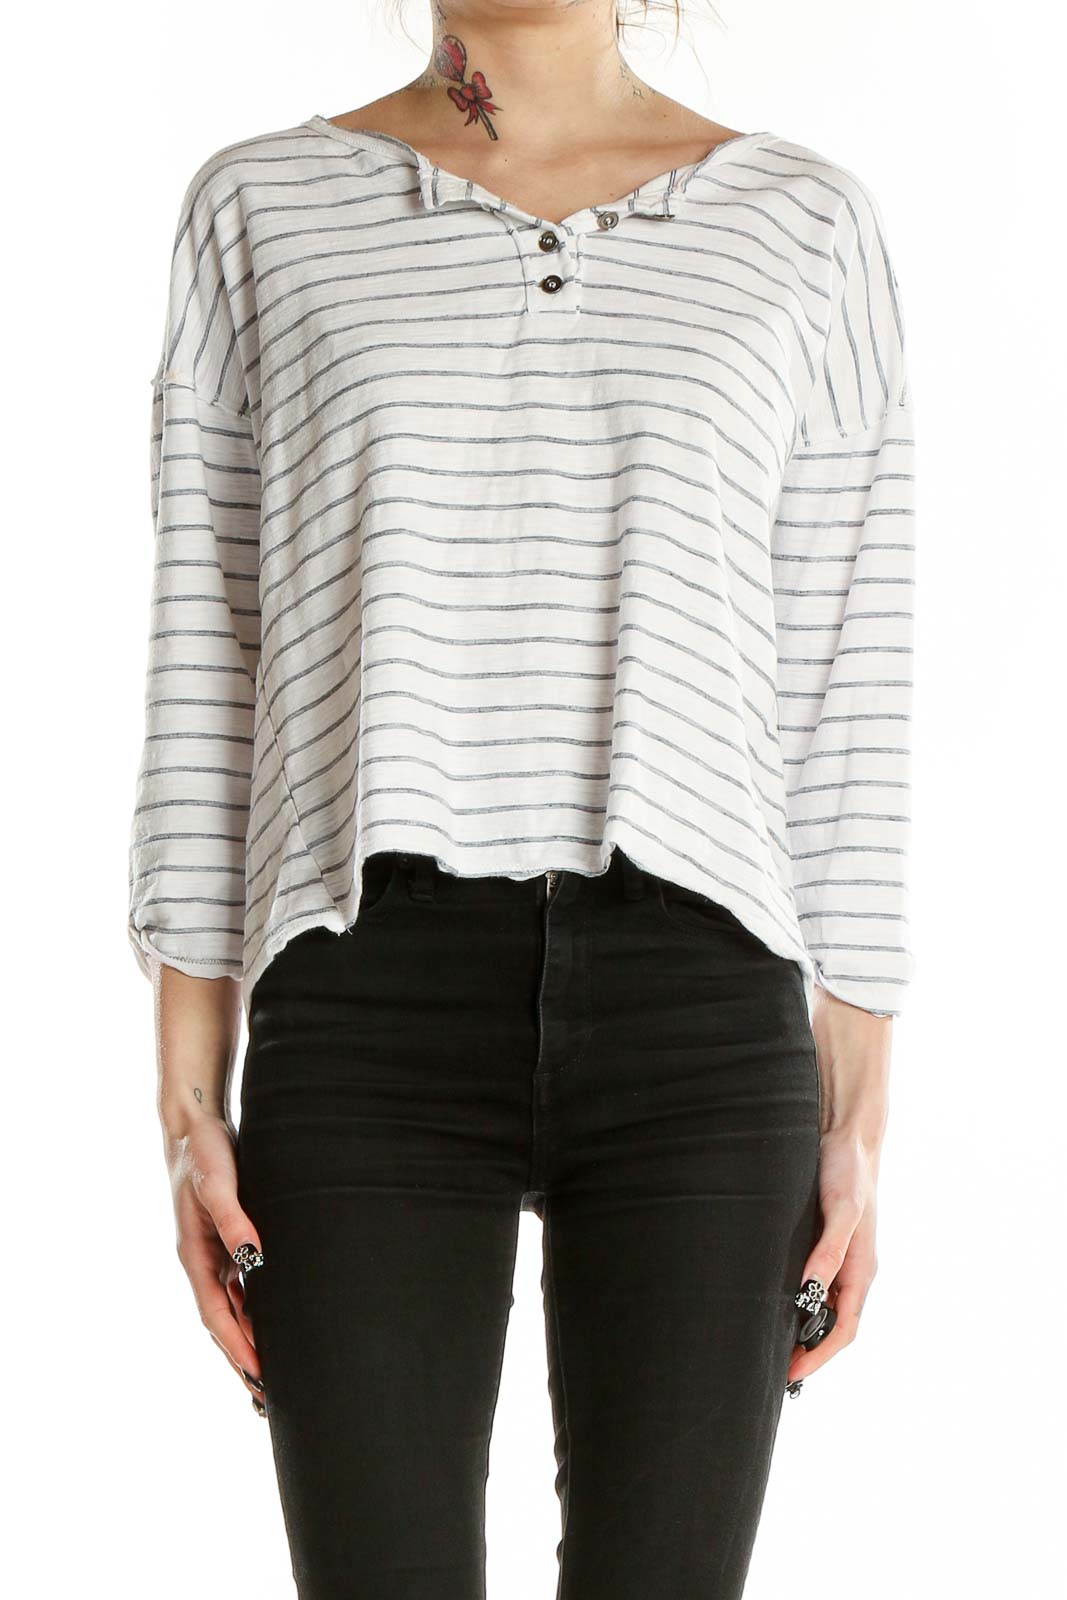 White Striped Henley Top Front